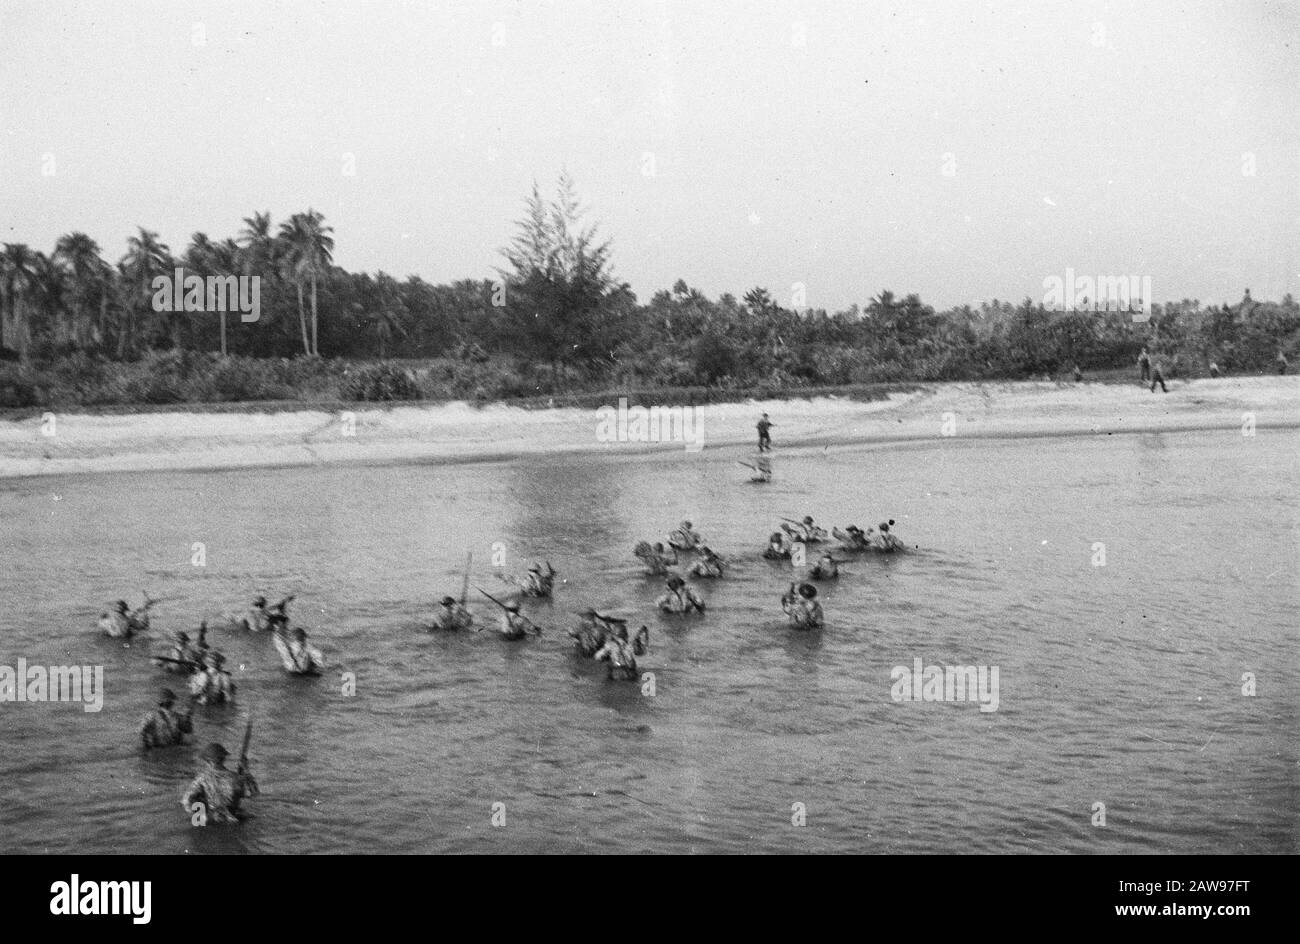 Loeboek Pakem and Baoengan  Perbaoengan (Sumatra East Coast). In collaboration with the Royal Navy and the Military Aviation Dutch troops made a landing at Baoengan which landing the occupation Pemetang Siantar preceded Date: July 29, 1948 Location: Indonesia, Dutch East Indies, Sumatra Stock Photo